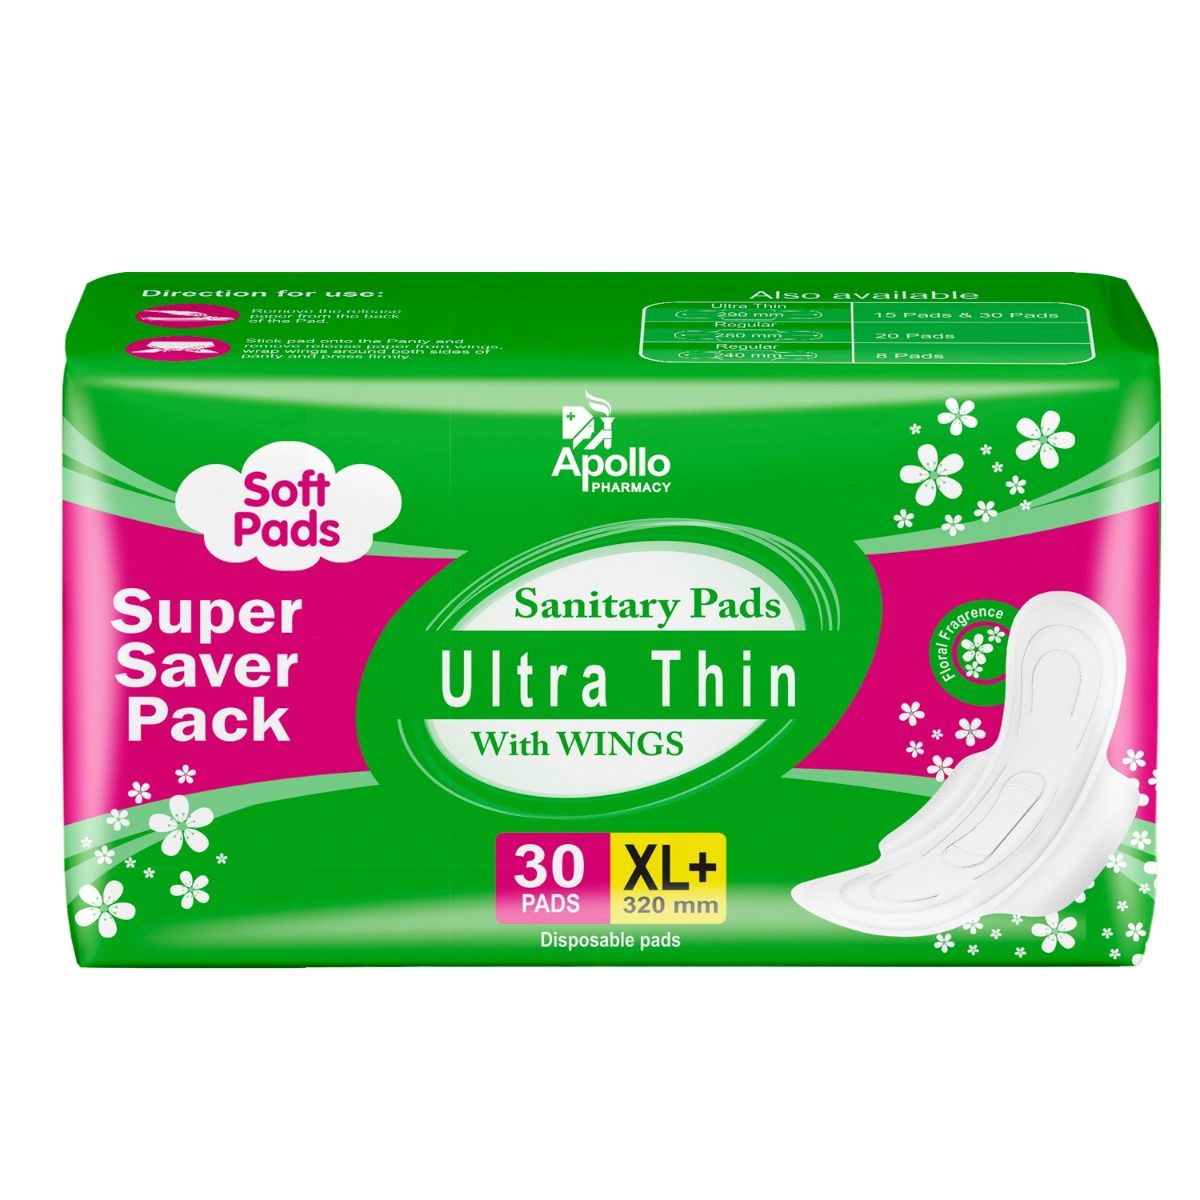 Apollo Pharmacy Ultrathin Sanitary Pads XL+ with Wings, 30 Count, Pack of 1 